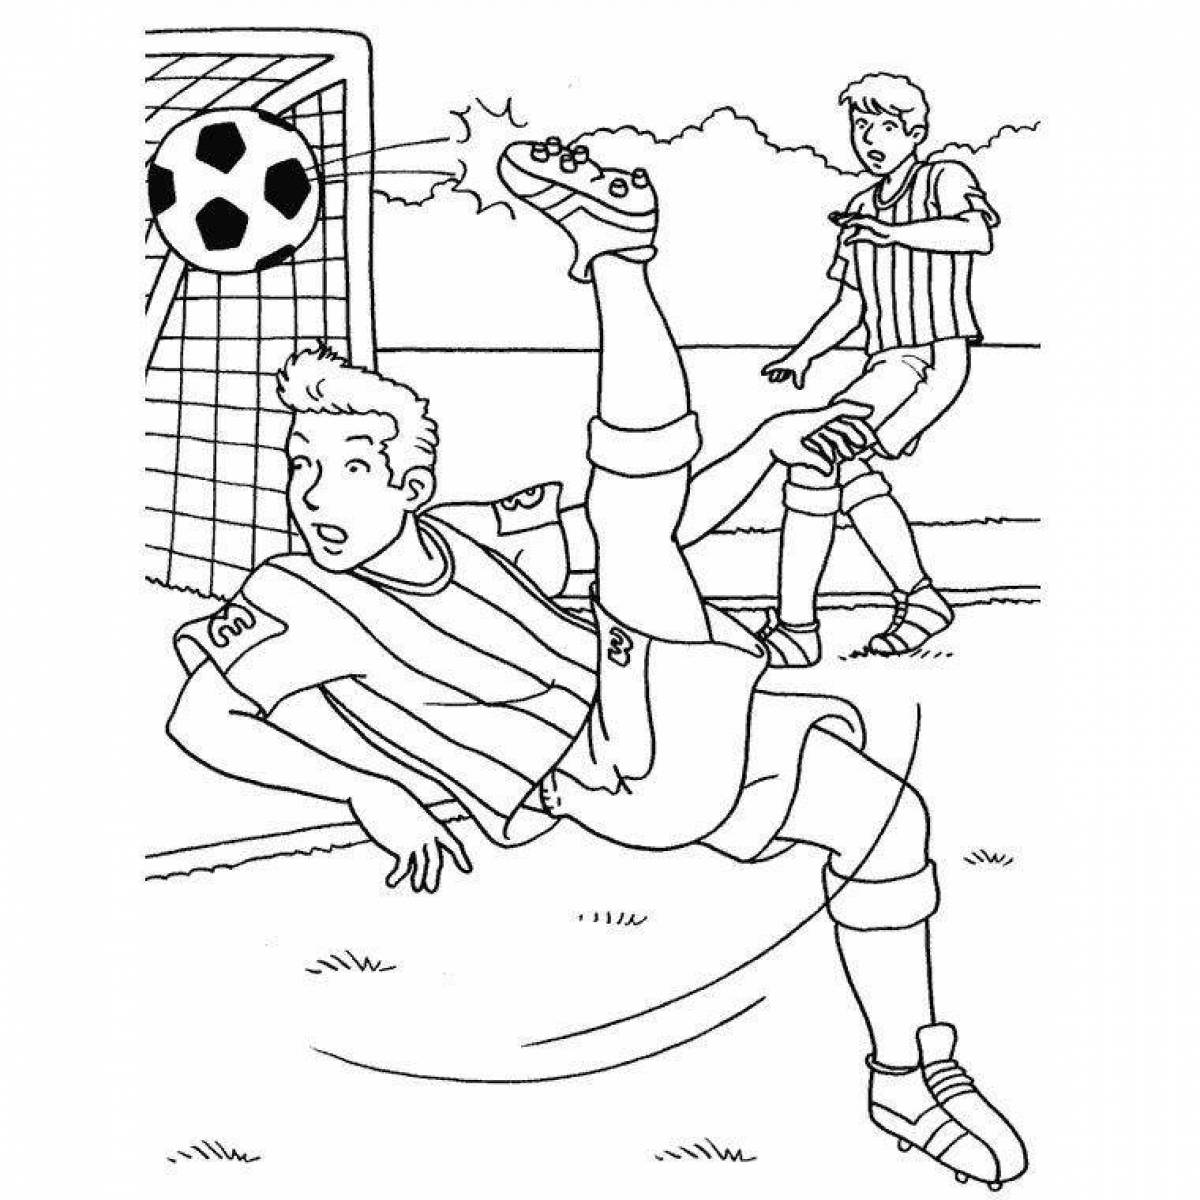 Outstanding football coloring book